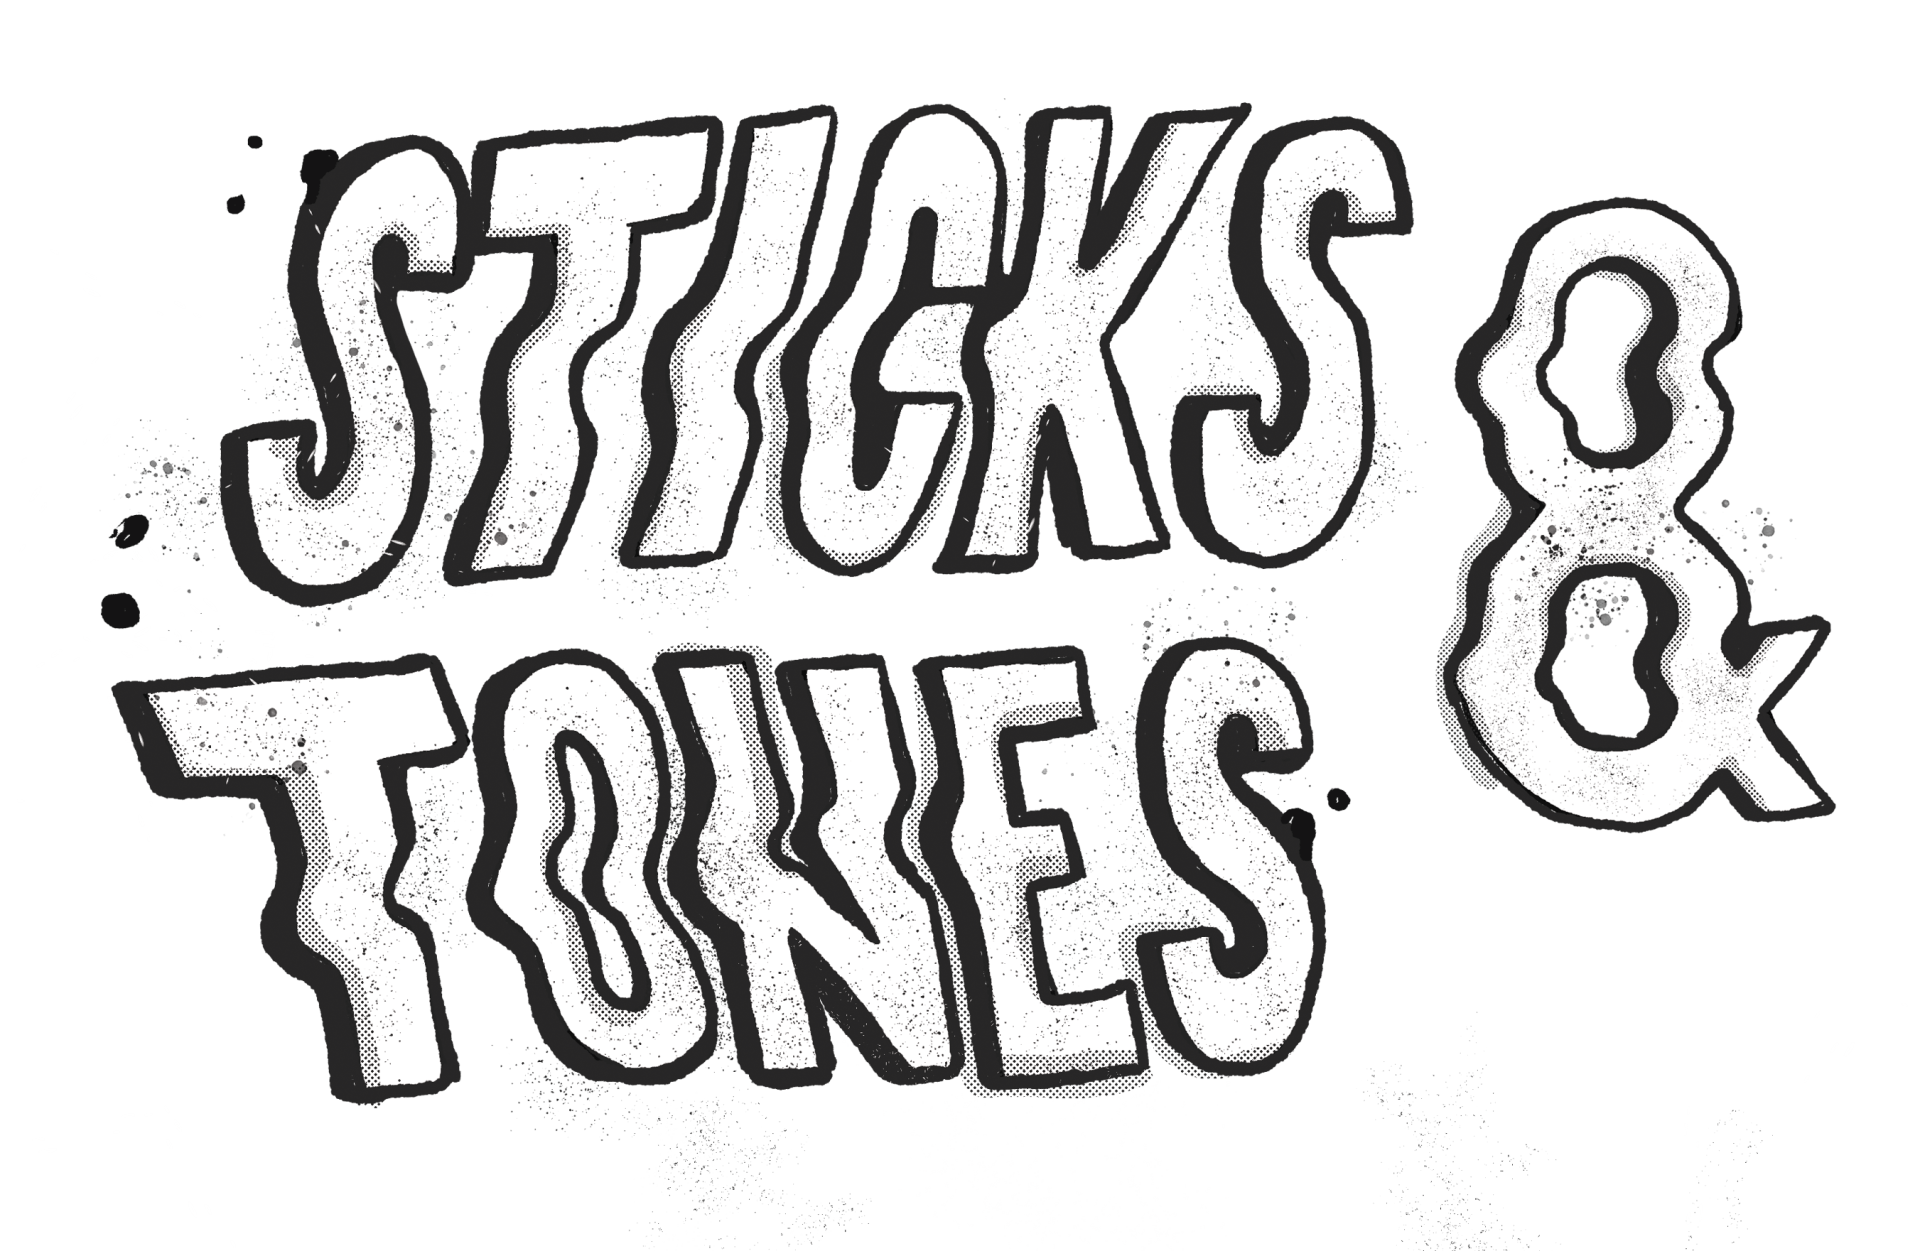 Sticks and Tones—Local Band in Toowoomba